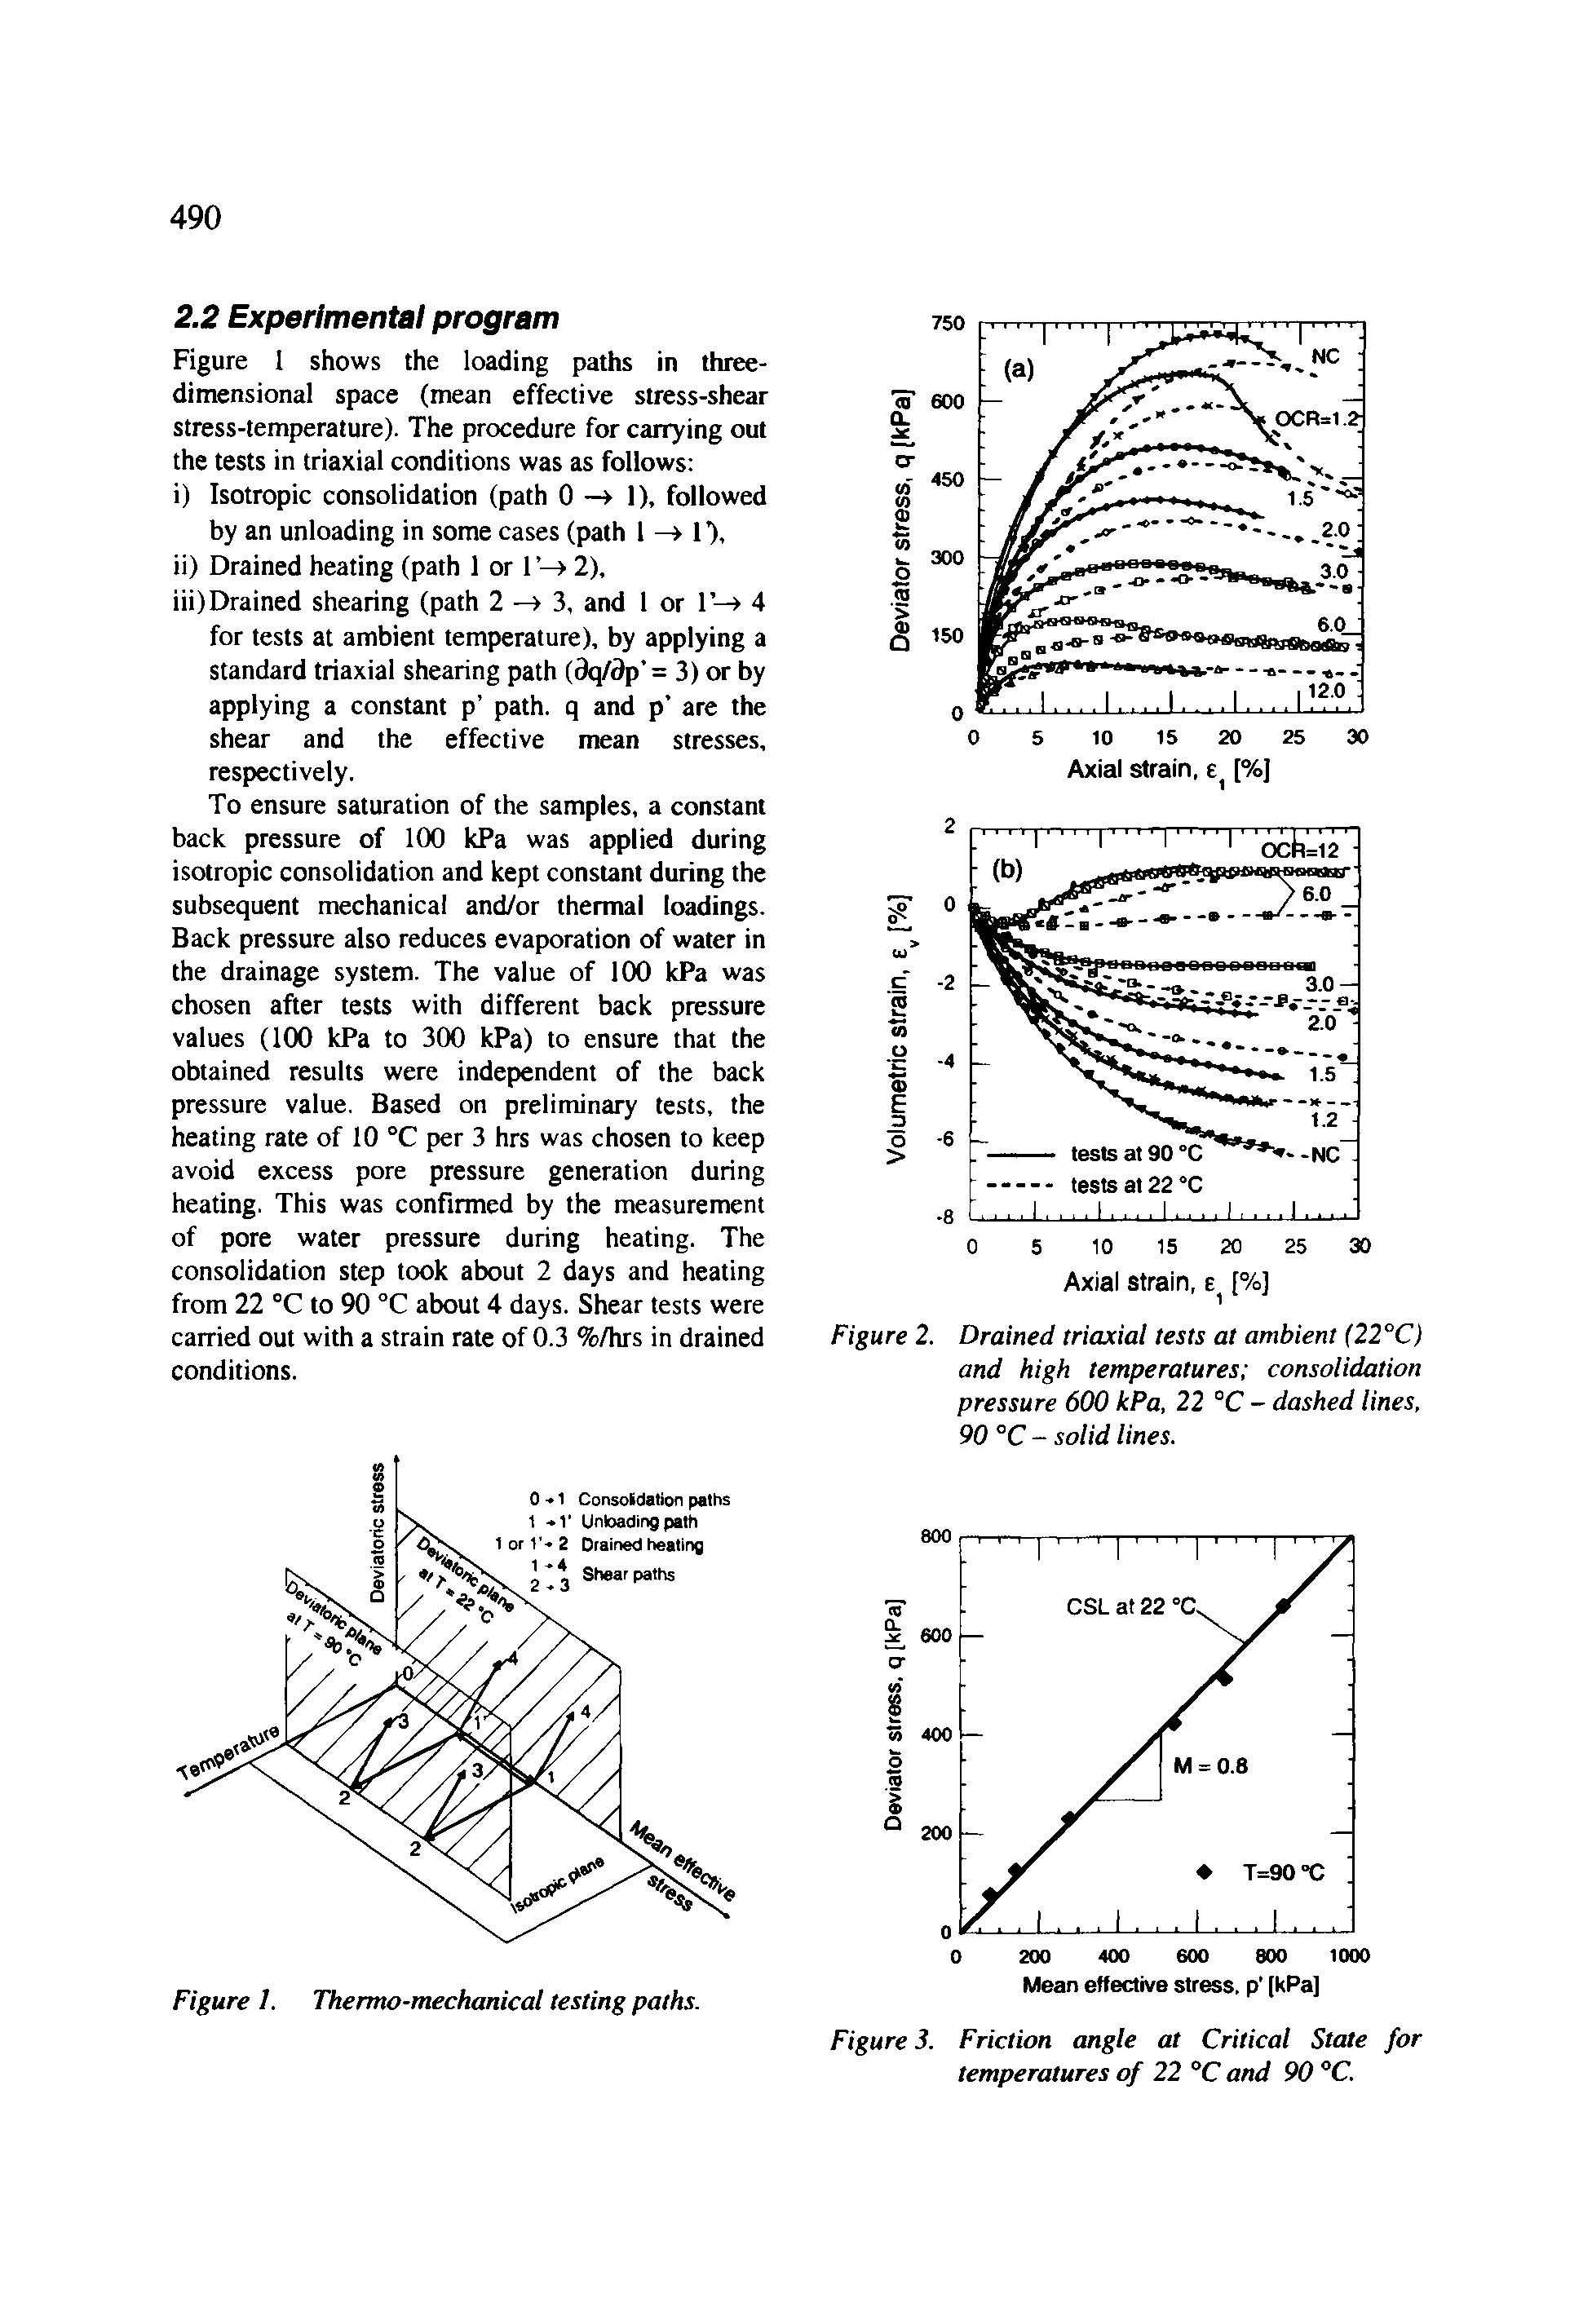 Figure 2. Drained triaxial tests at ambient (22°C) and high temperatures consolidation pressure 600 kPa, 22 °C - dashed lines, 90 °C - solid lines.